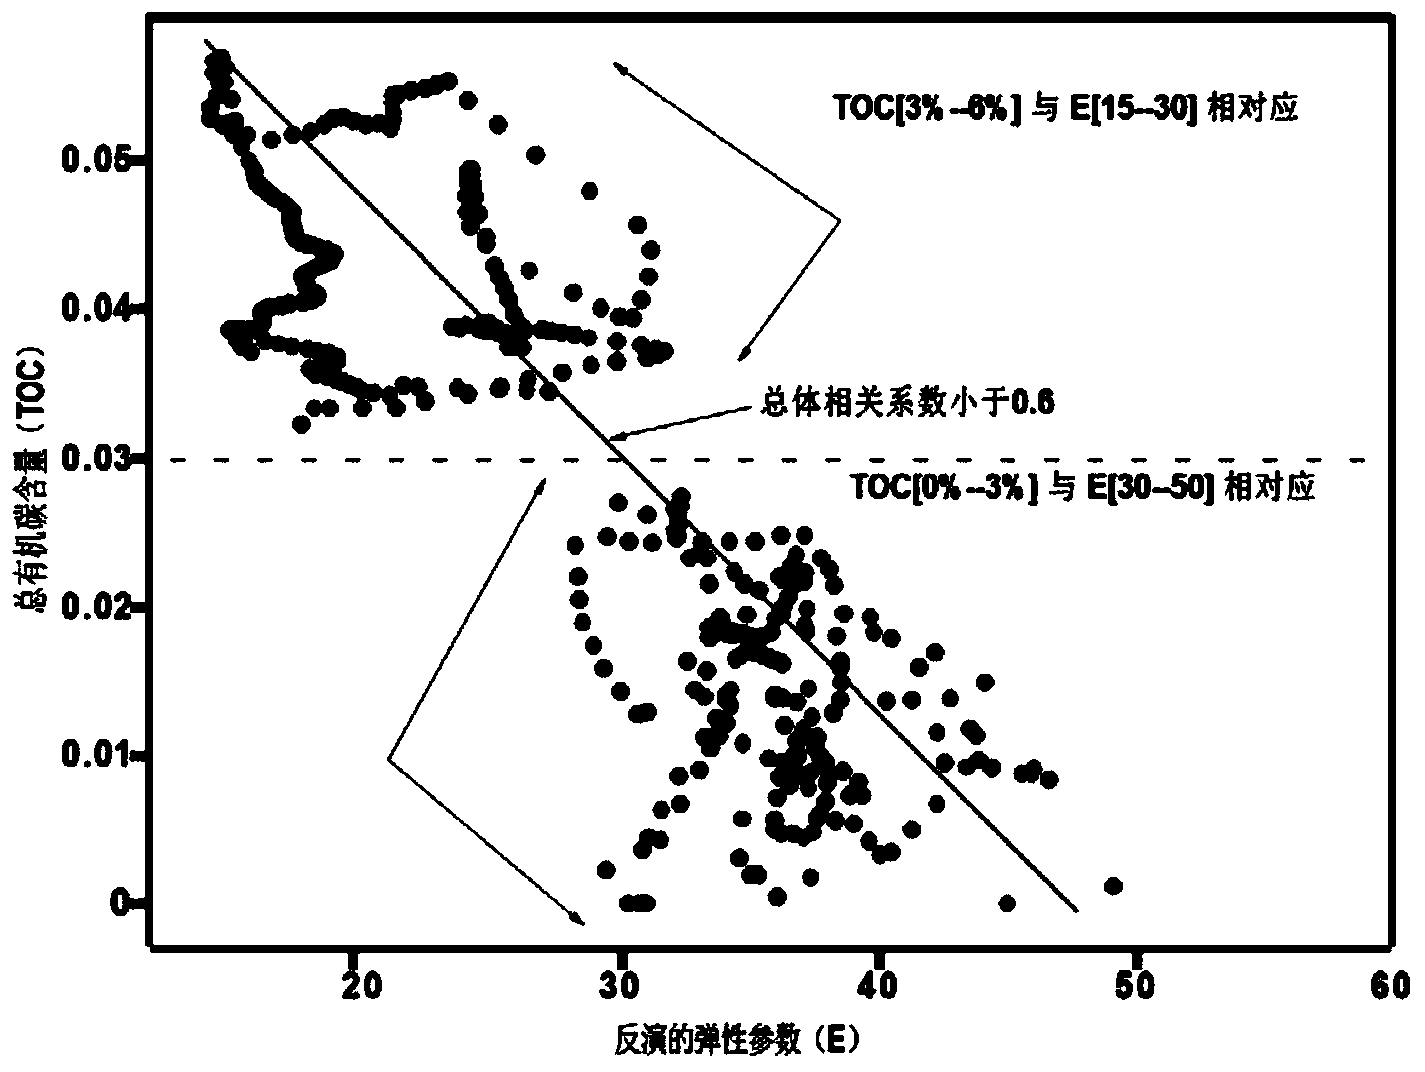 Method for forecasting TOC (Total Organic Carbon) content of shale reservoir stratum